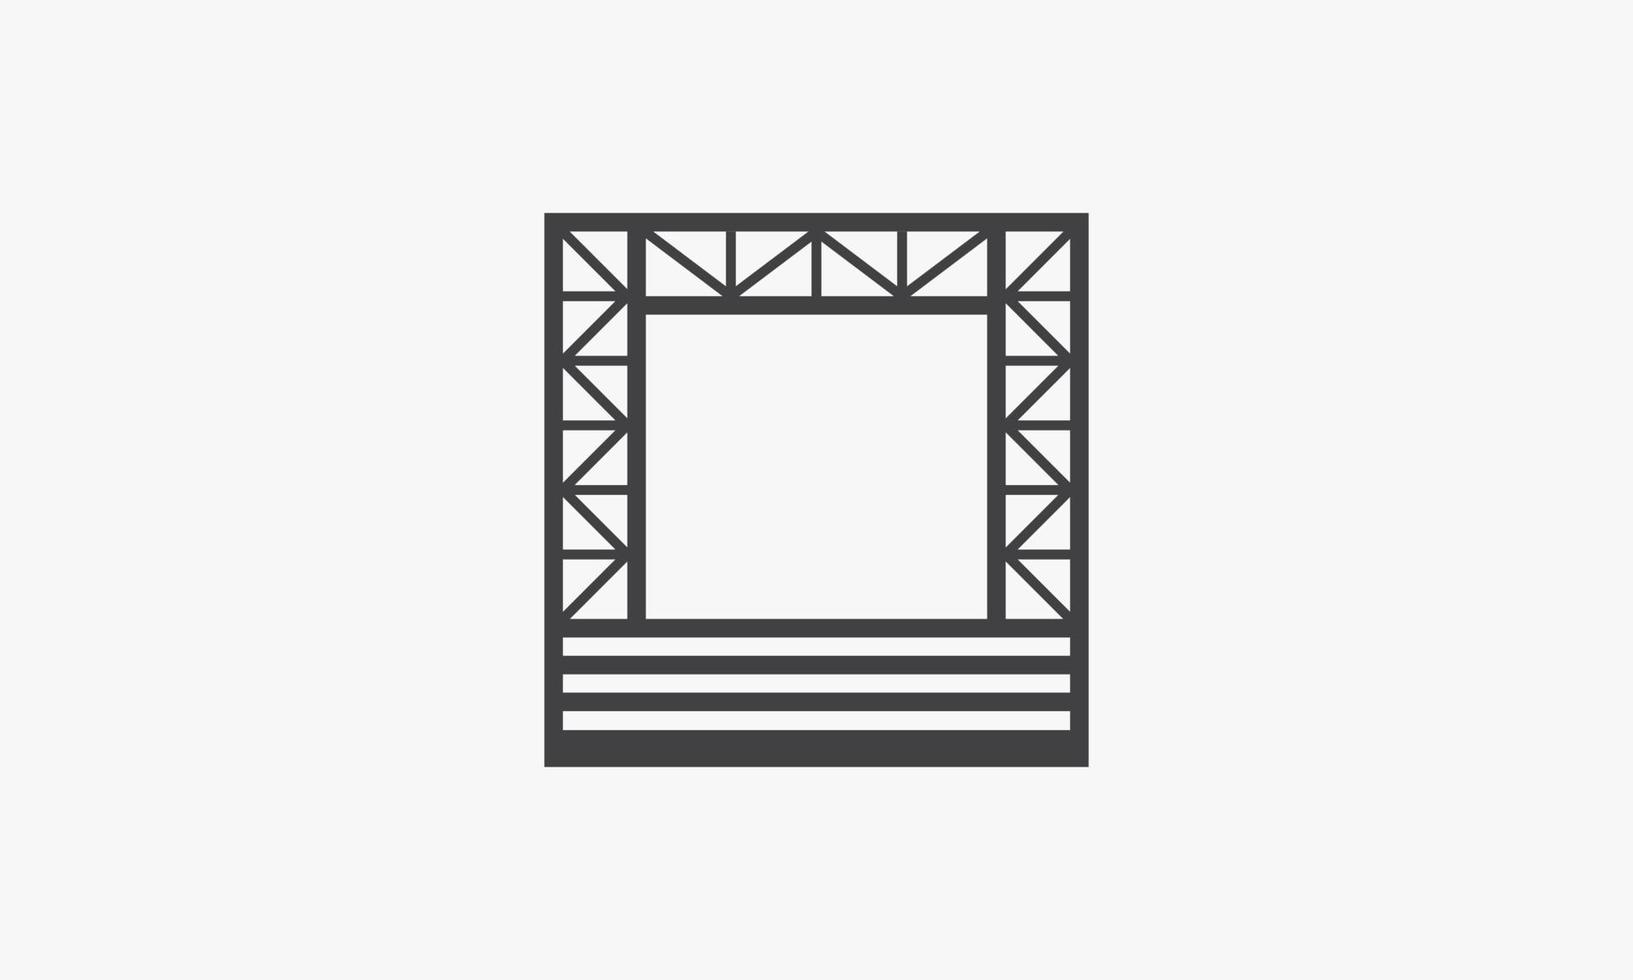 stage icon. isolated on white background. vector illustration.